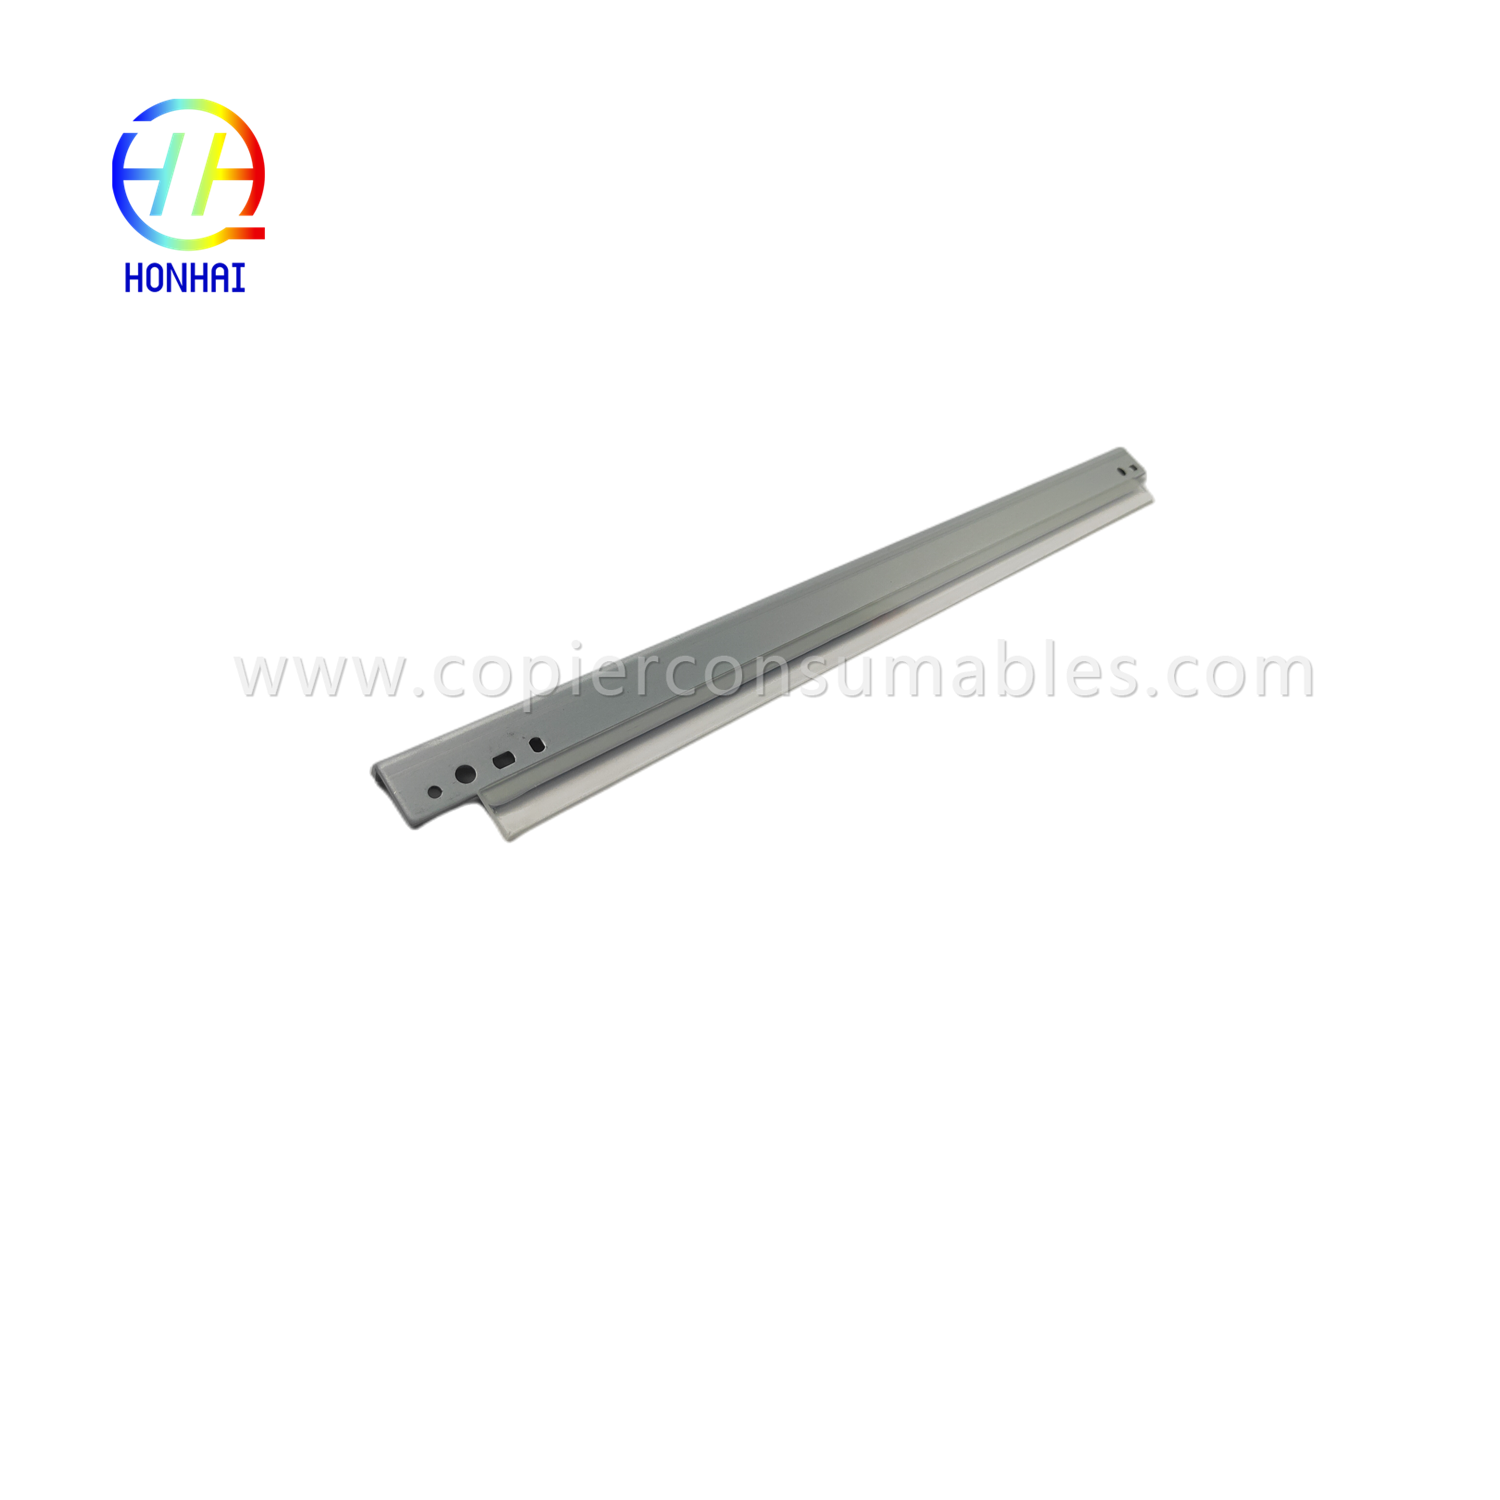 https://c585.goodo.net/drum-cleaning-blade-for-canon-ir-2520-2525-2535-2545-2530-2540-ምርት/